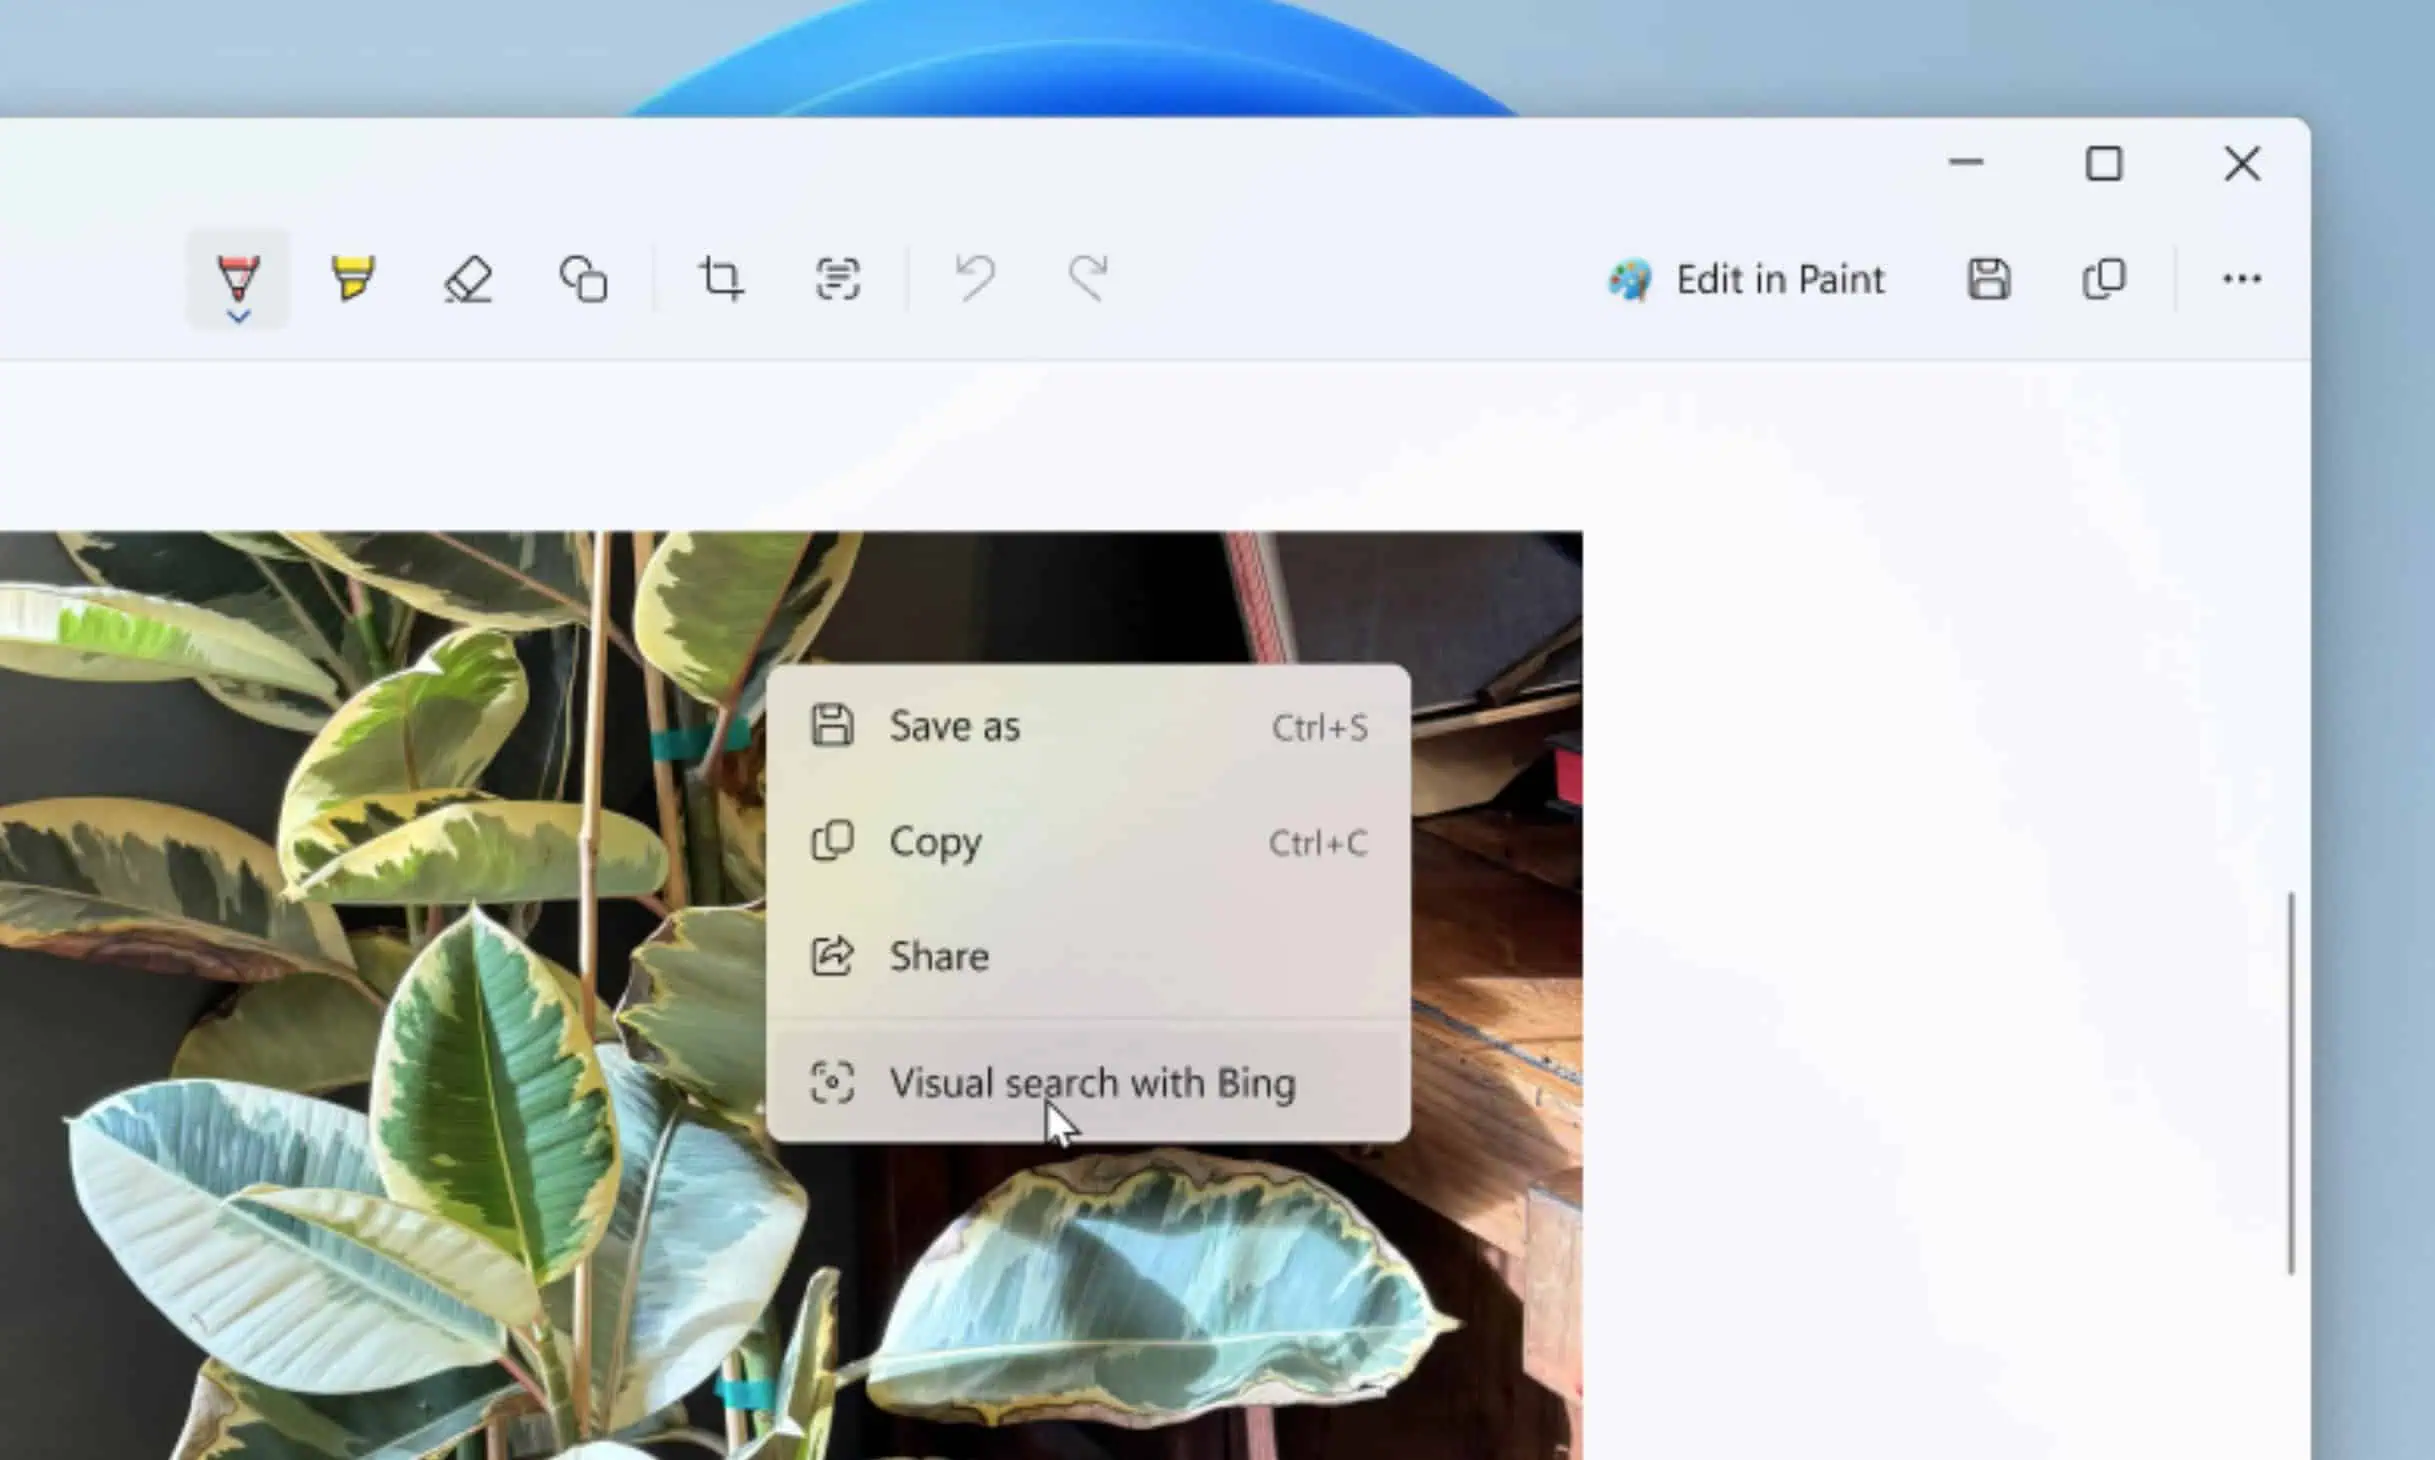 Windows 11’s Snipping Tool gets Bing visual search integration